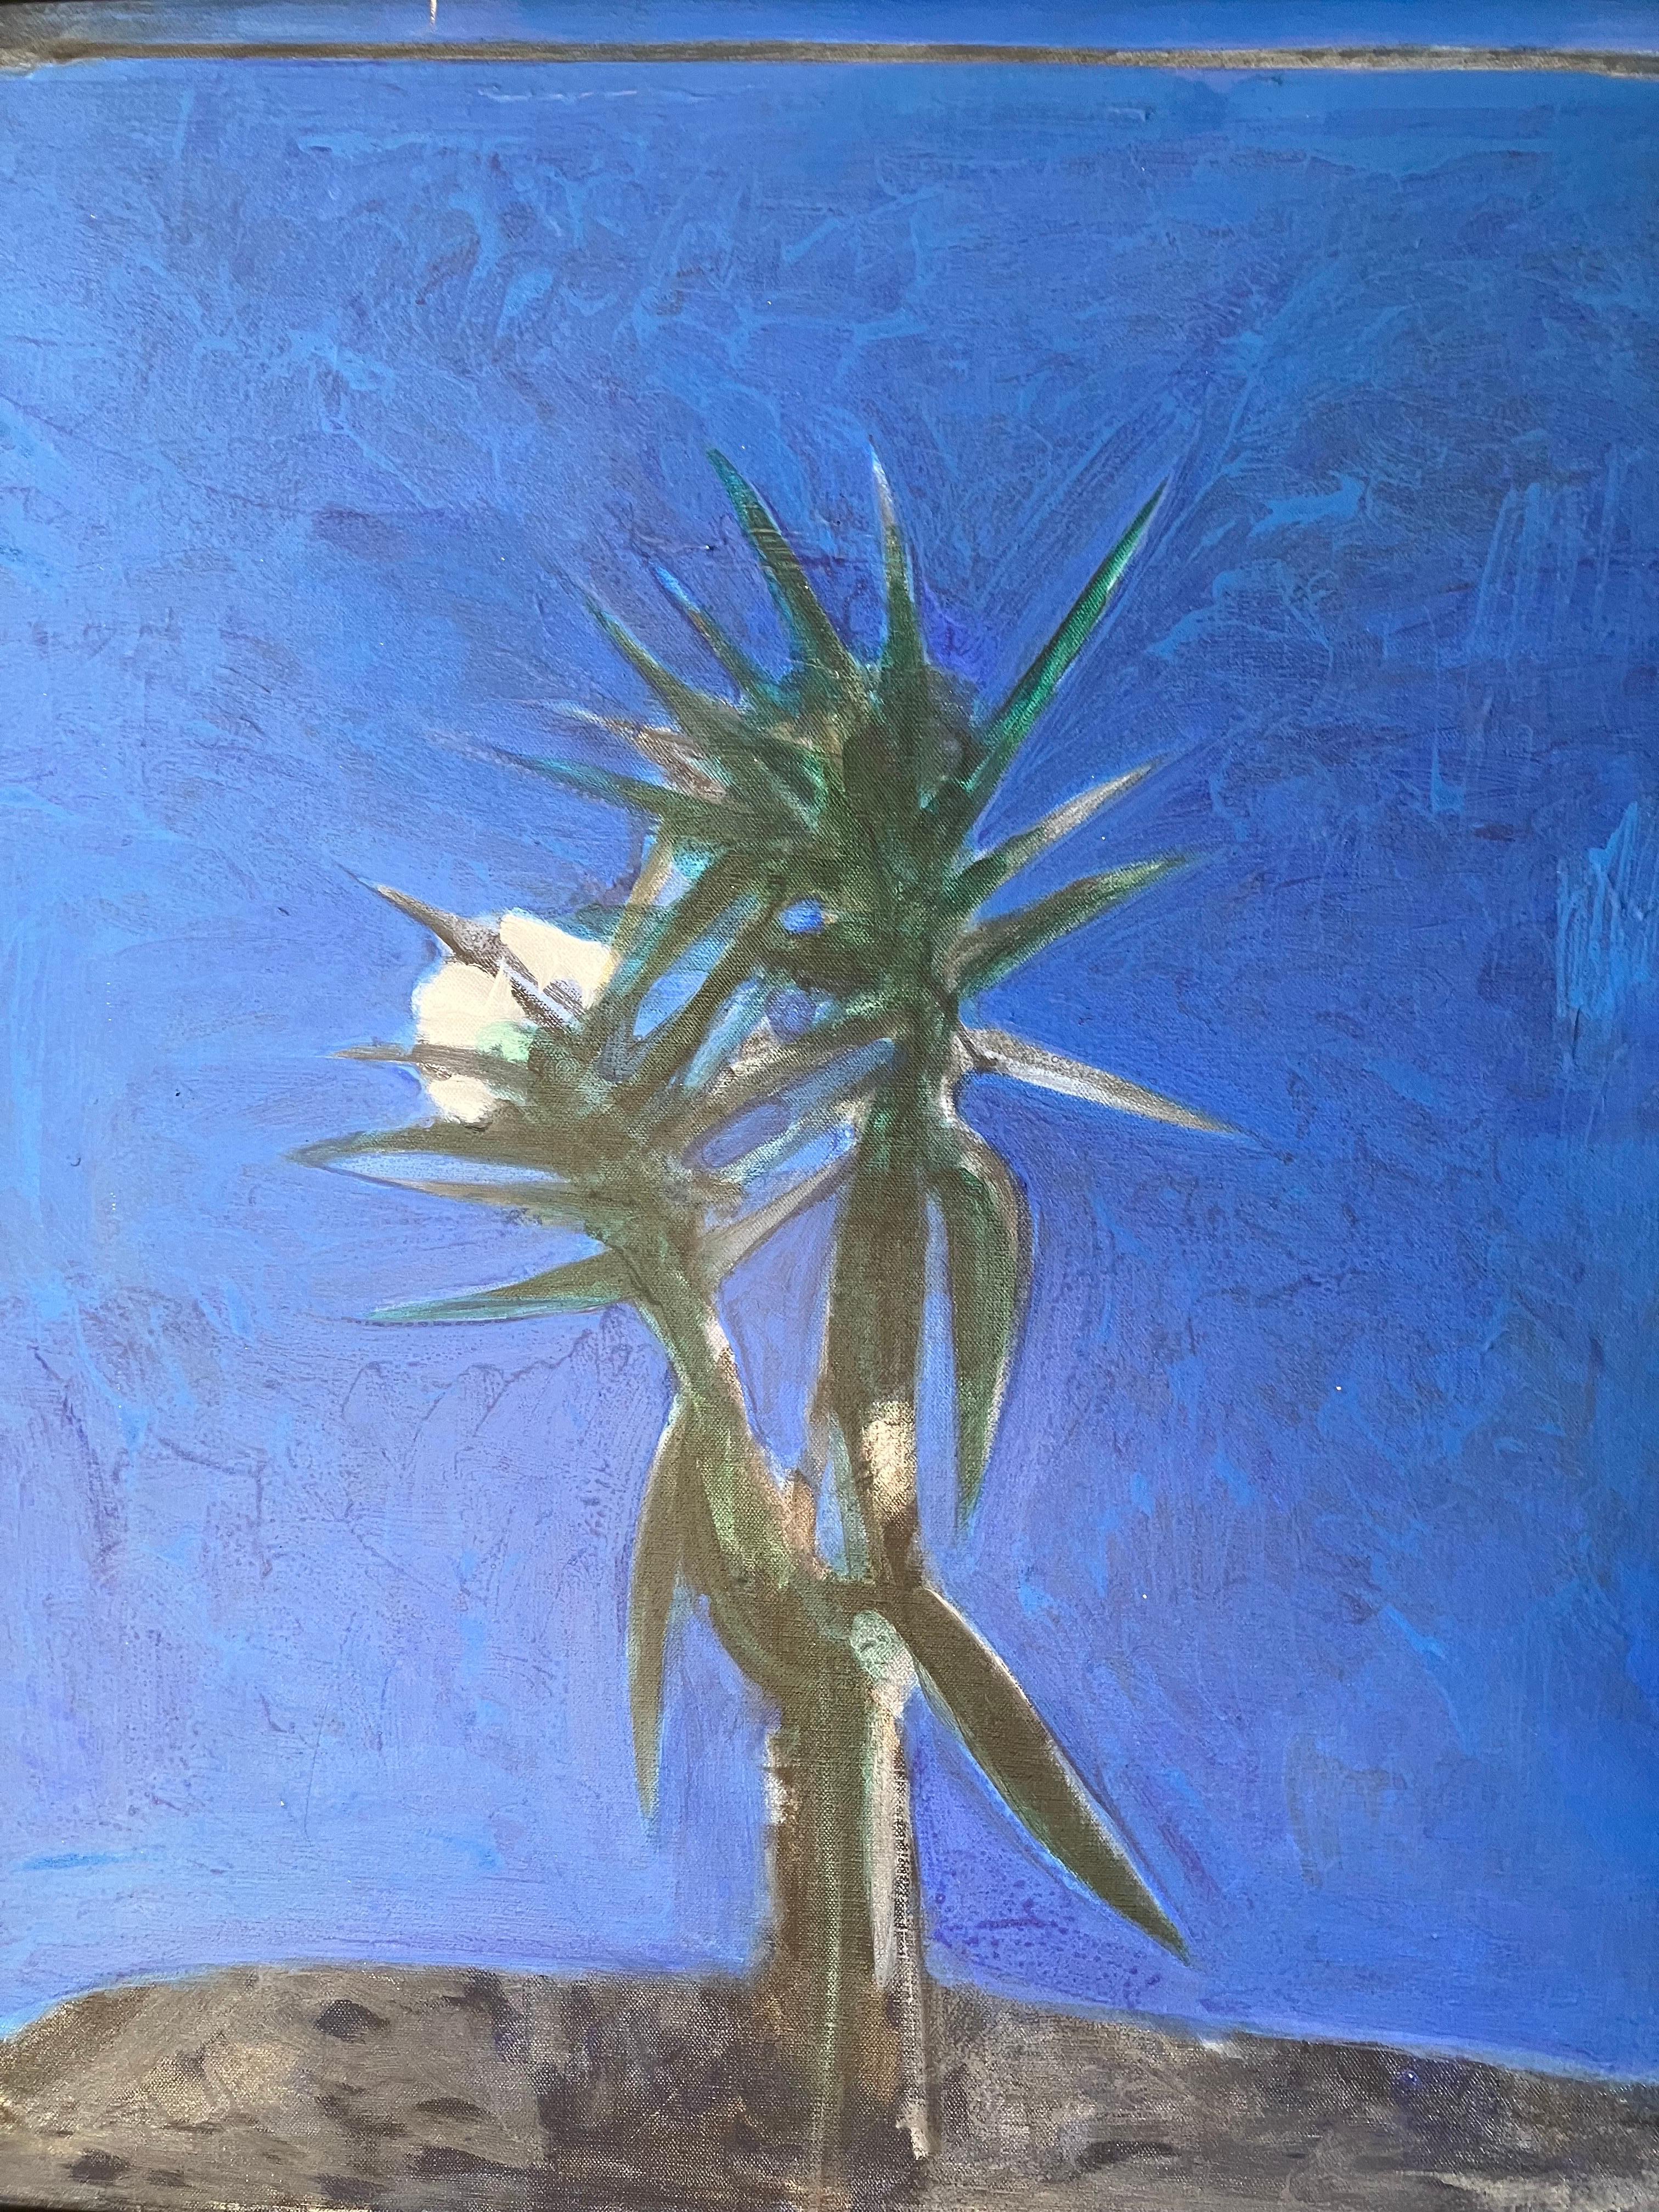 Piero Guccione (Italy, 1935-2018), “Oleandro in Controluce” (Oleander in Silhouette ), titled and signed lower margins, titled, signed and dated verso, with Galleria Il Gabbiano, Rome label to stretcher.

Piero Guccione was a leading figure in the